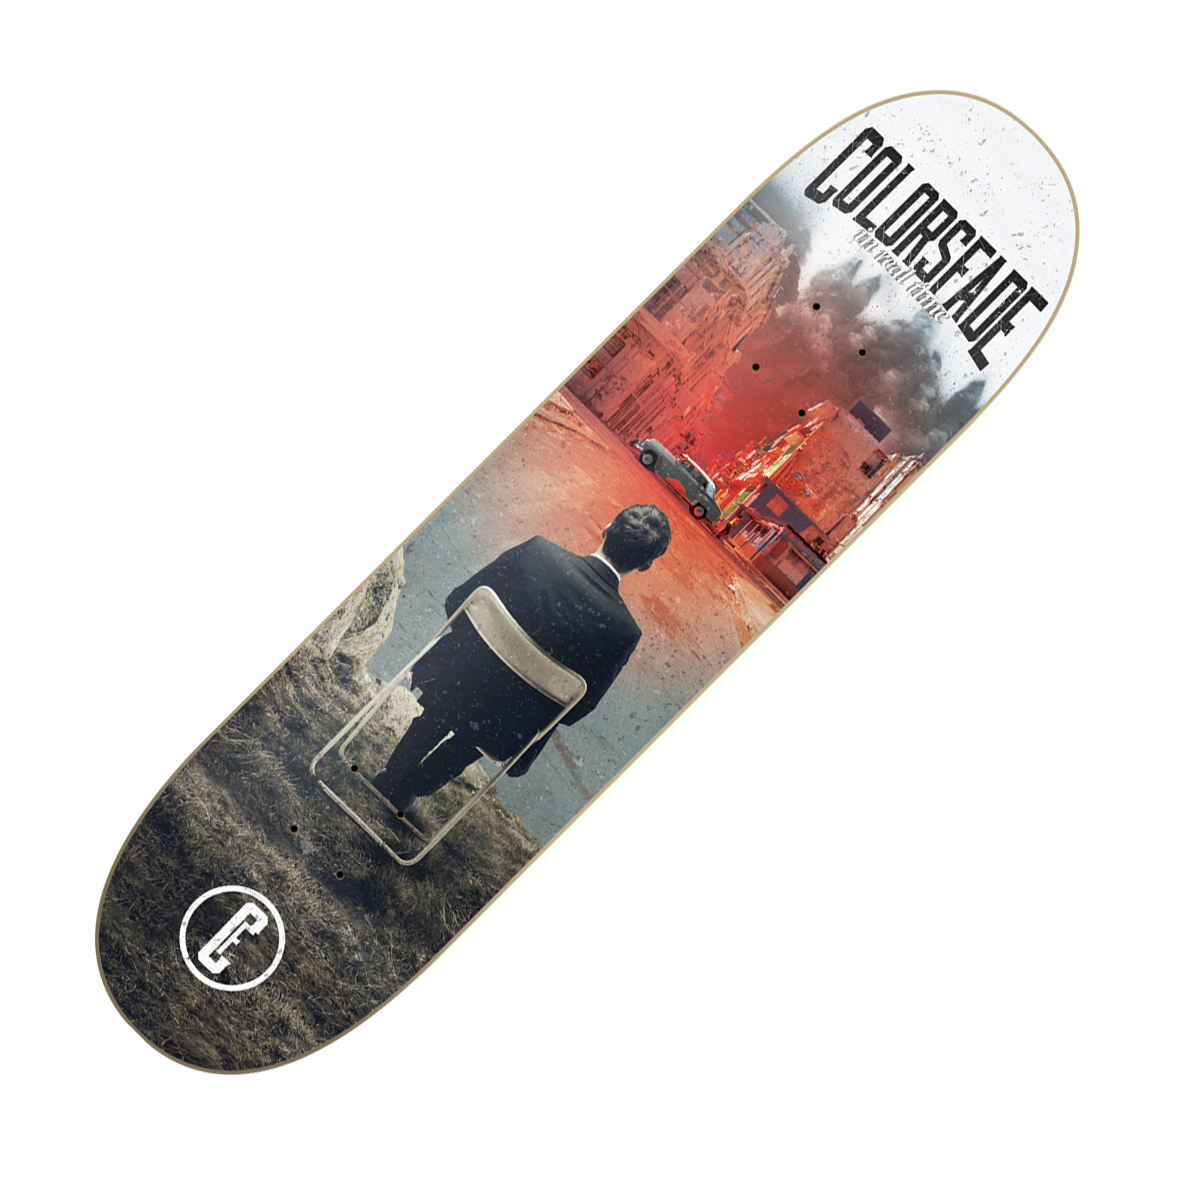 COLORSFADE - "In Real Time" (Skateboard Deck)